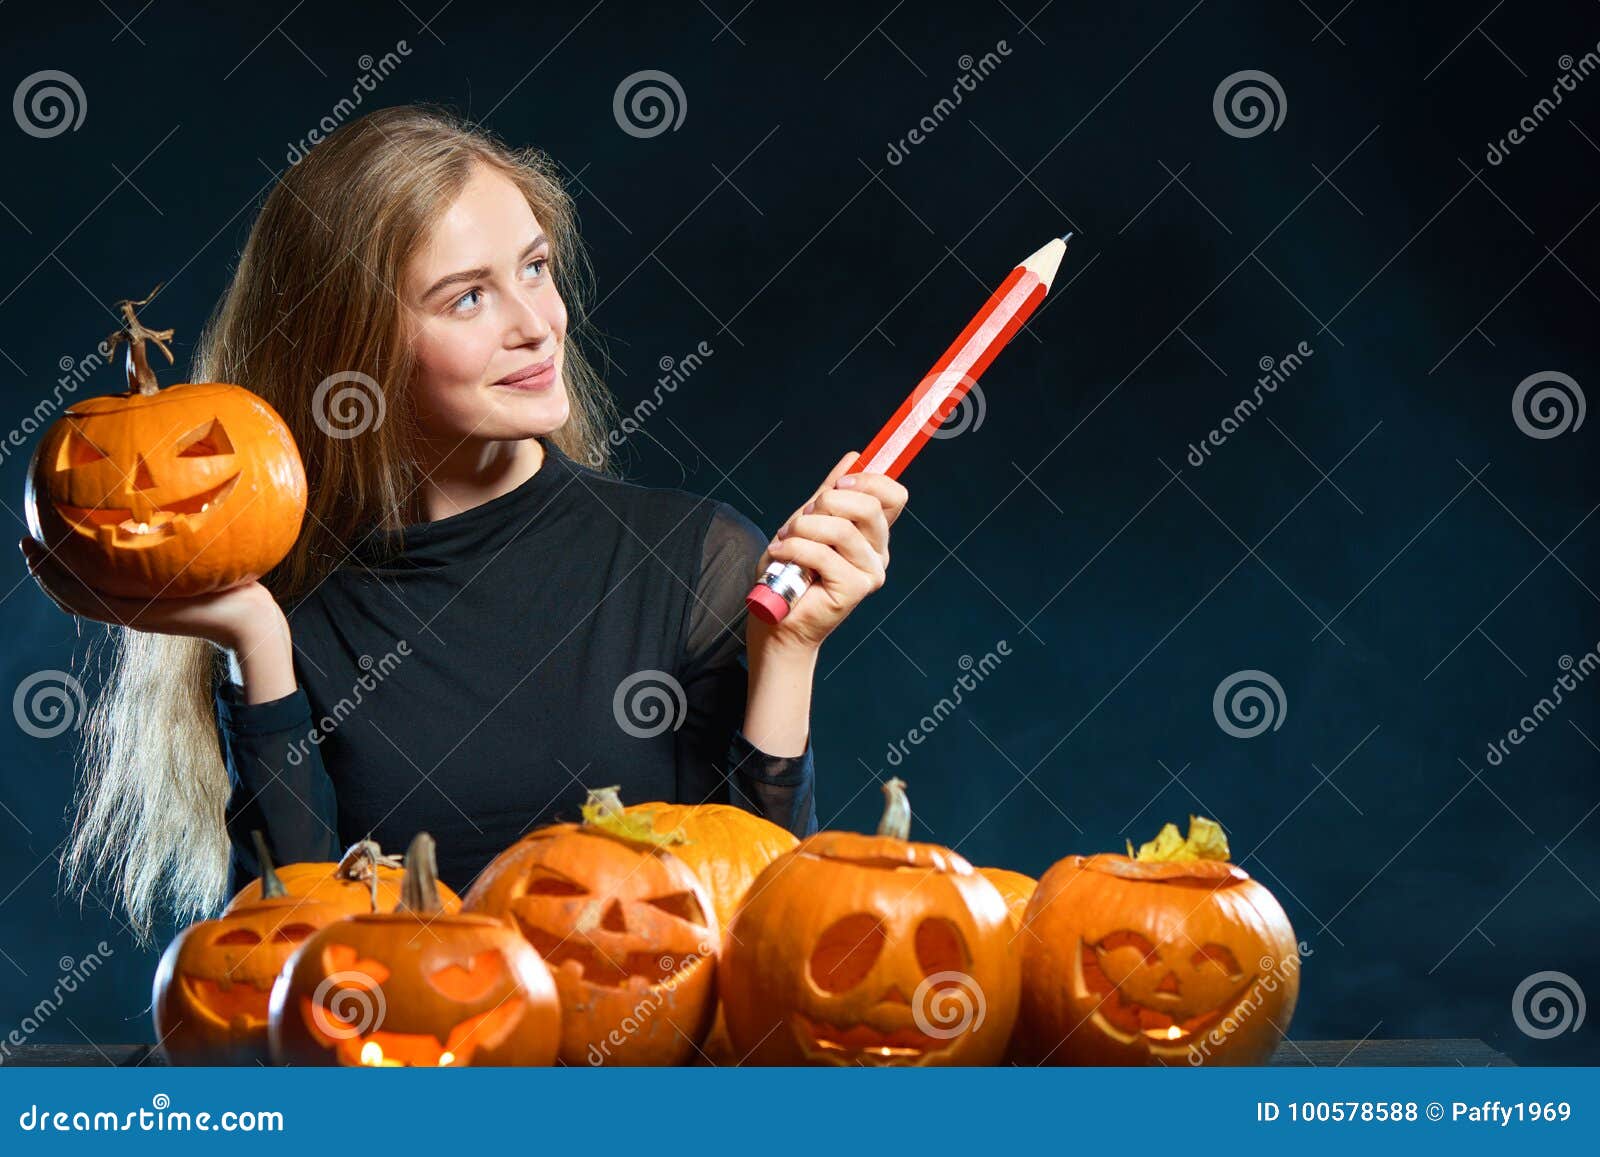 Woman with Halloween Pumpkins Stock Photo - Image of carved, happy ...